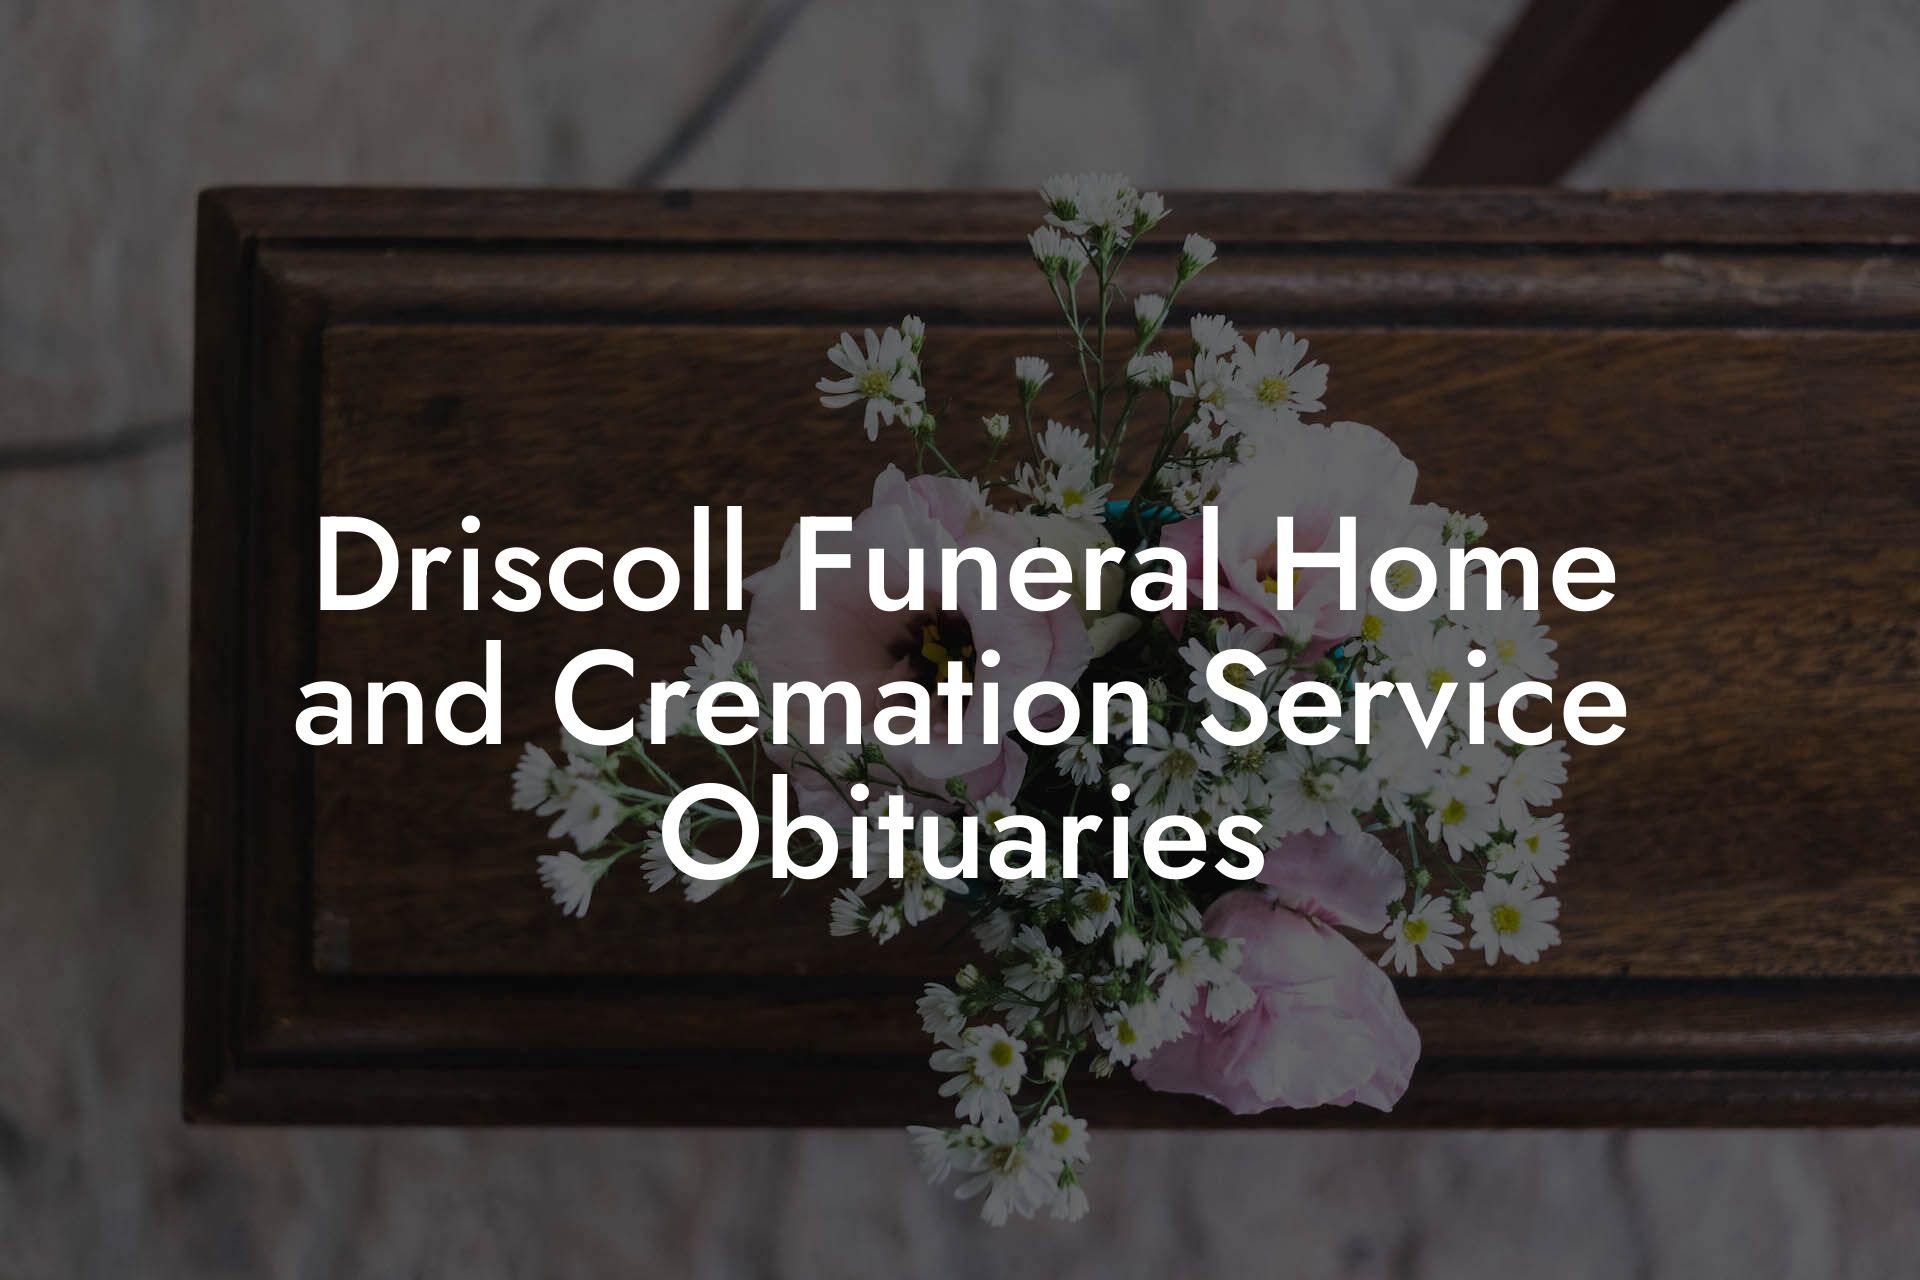 Driscoll Funeral Home and Cremation Service Obituaries